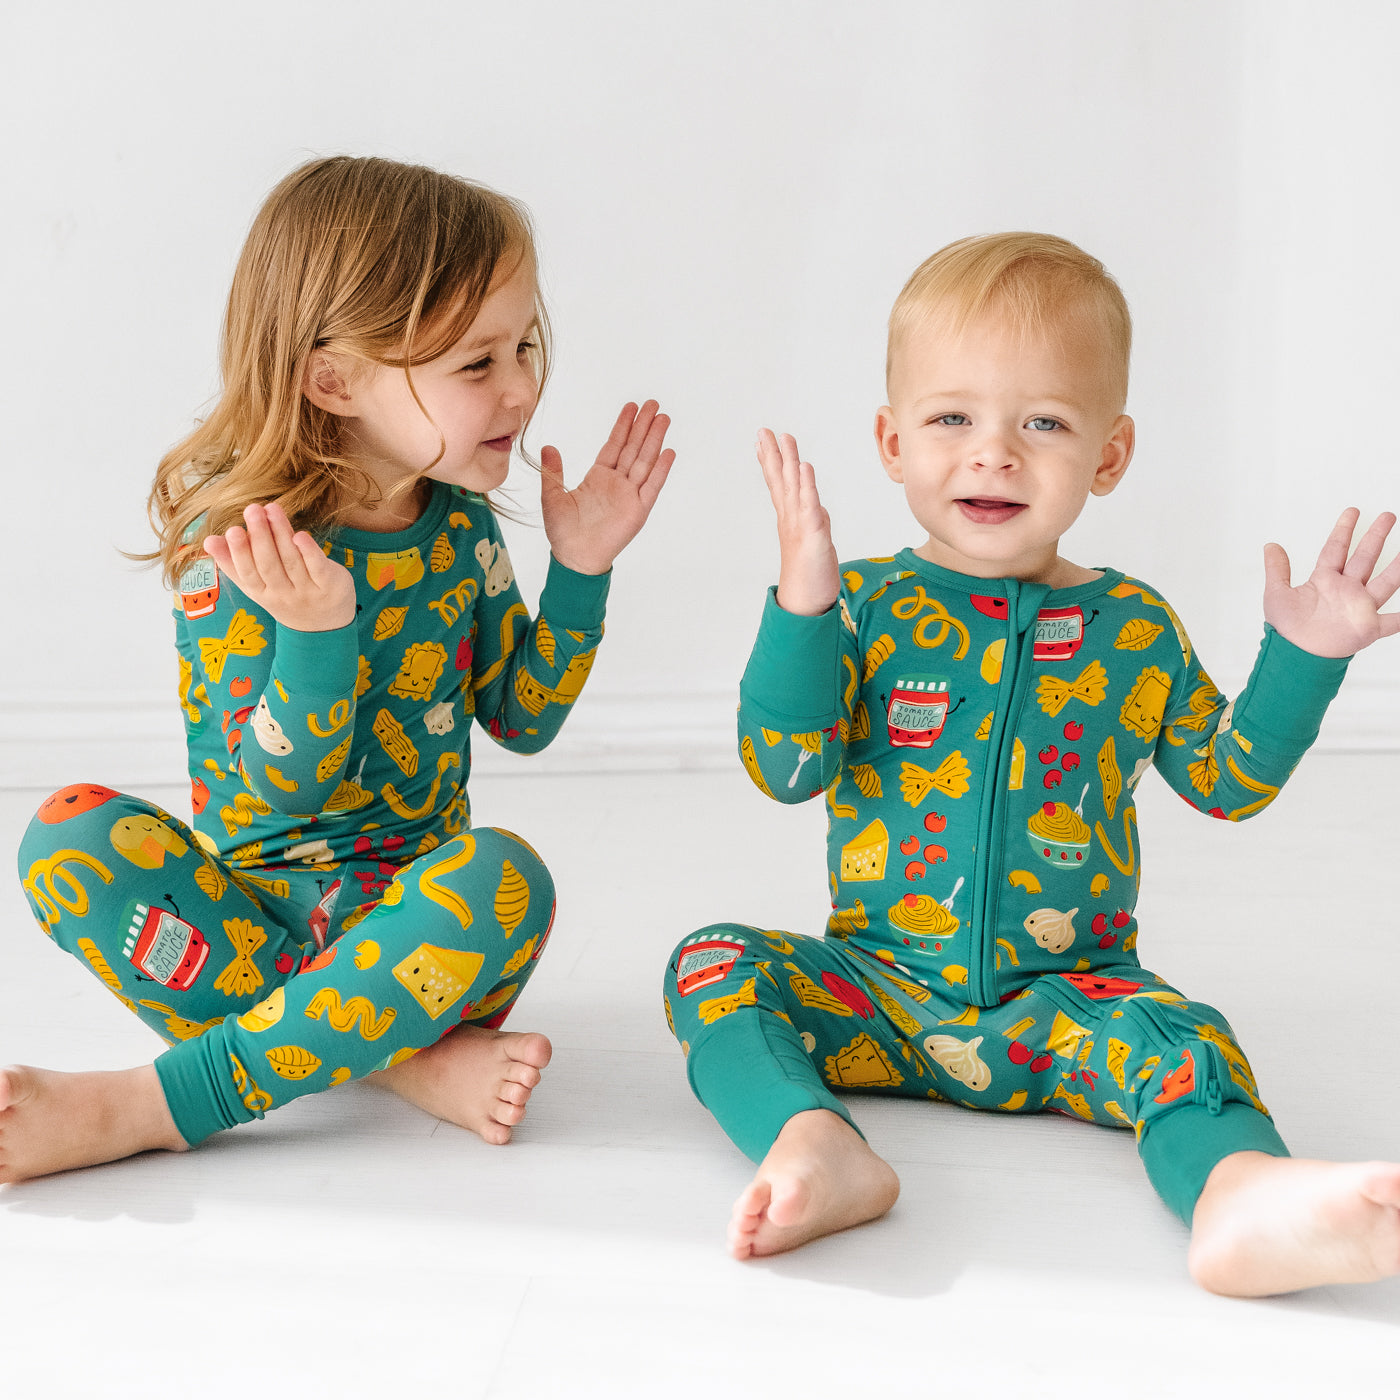 Pasta Party Two-Piece Pajama Set 2T by Little Sleepies